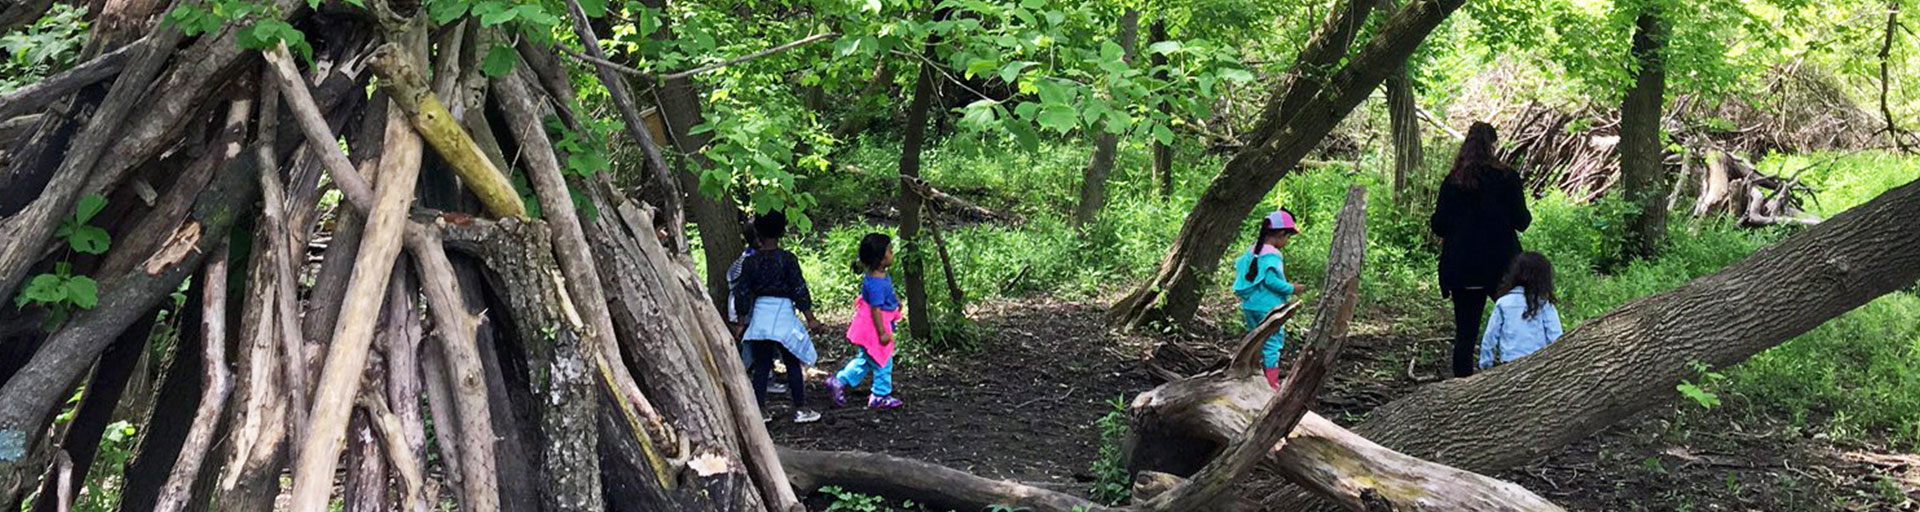 teacher and young children walking through forest